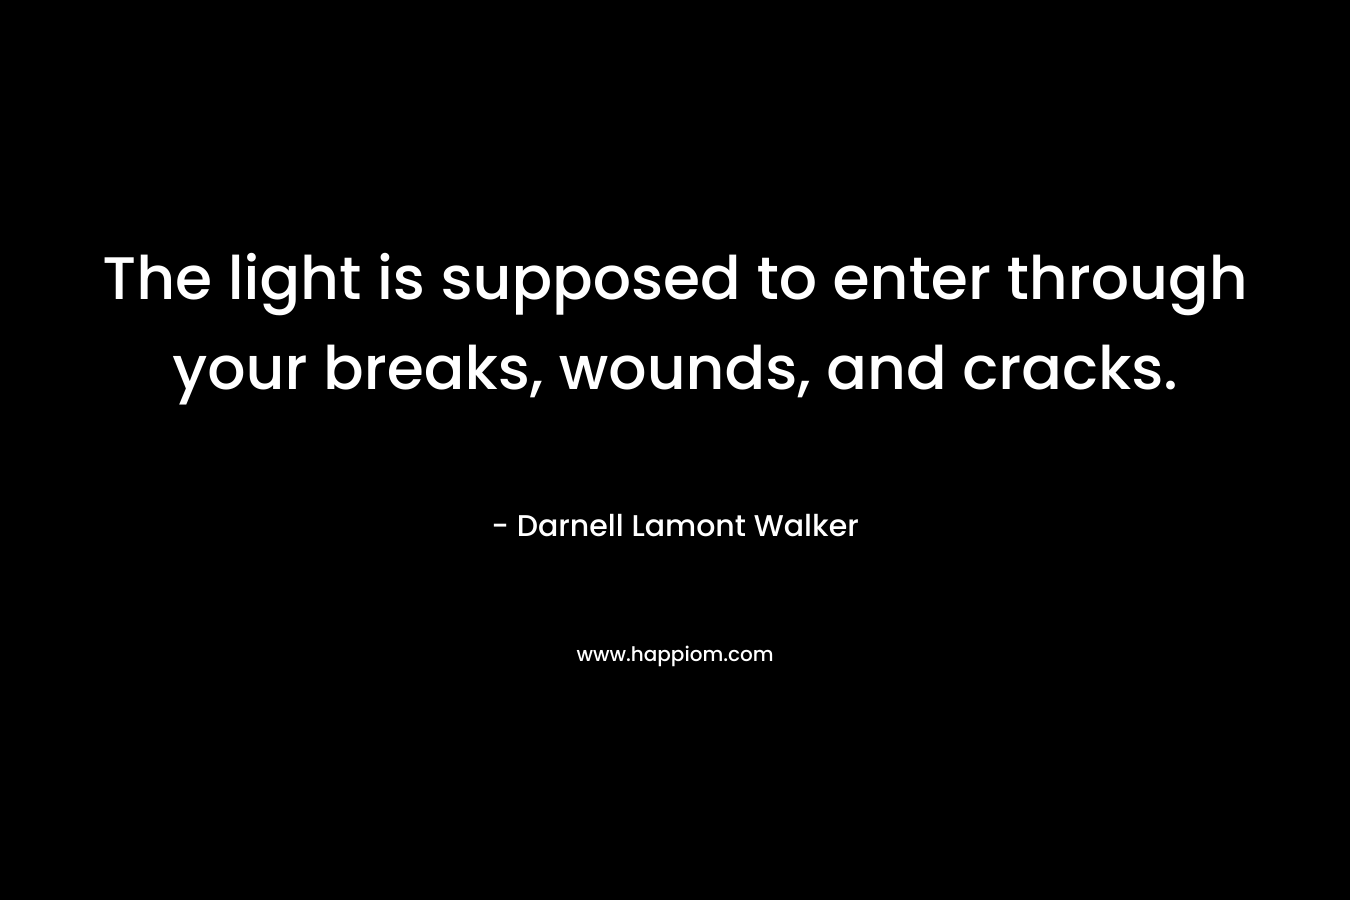 The light is supposed to enter through your breaks, wounds, and cracks.